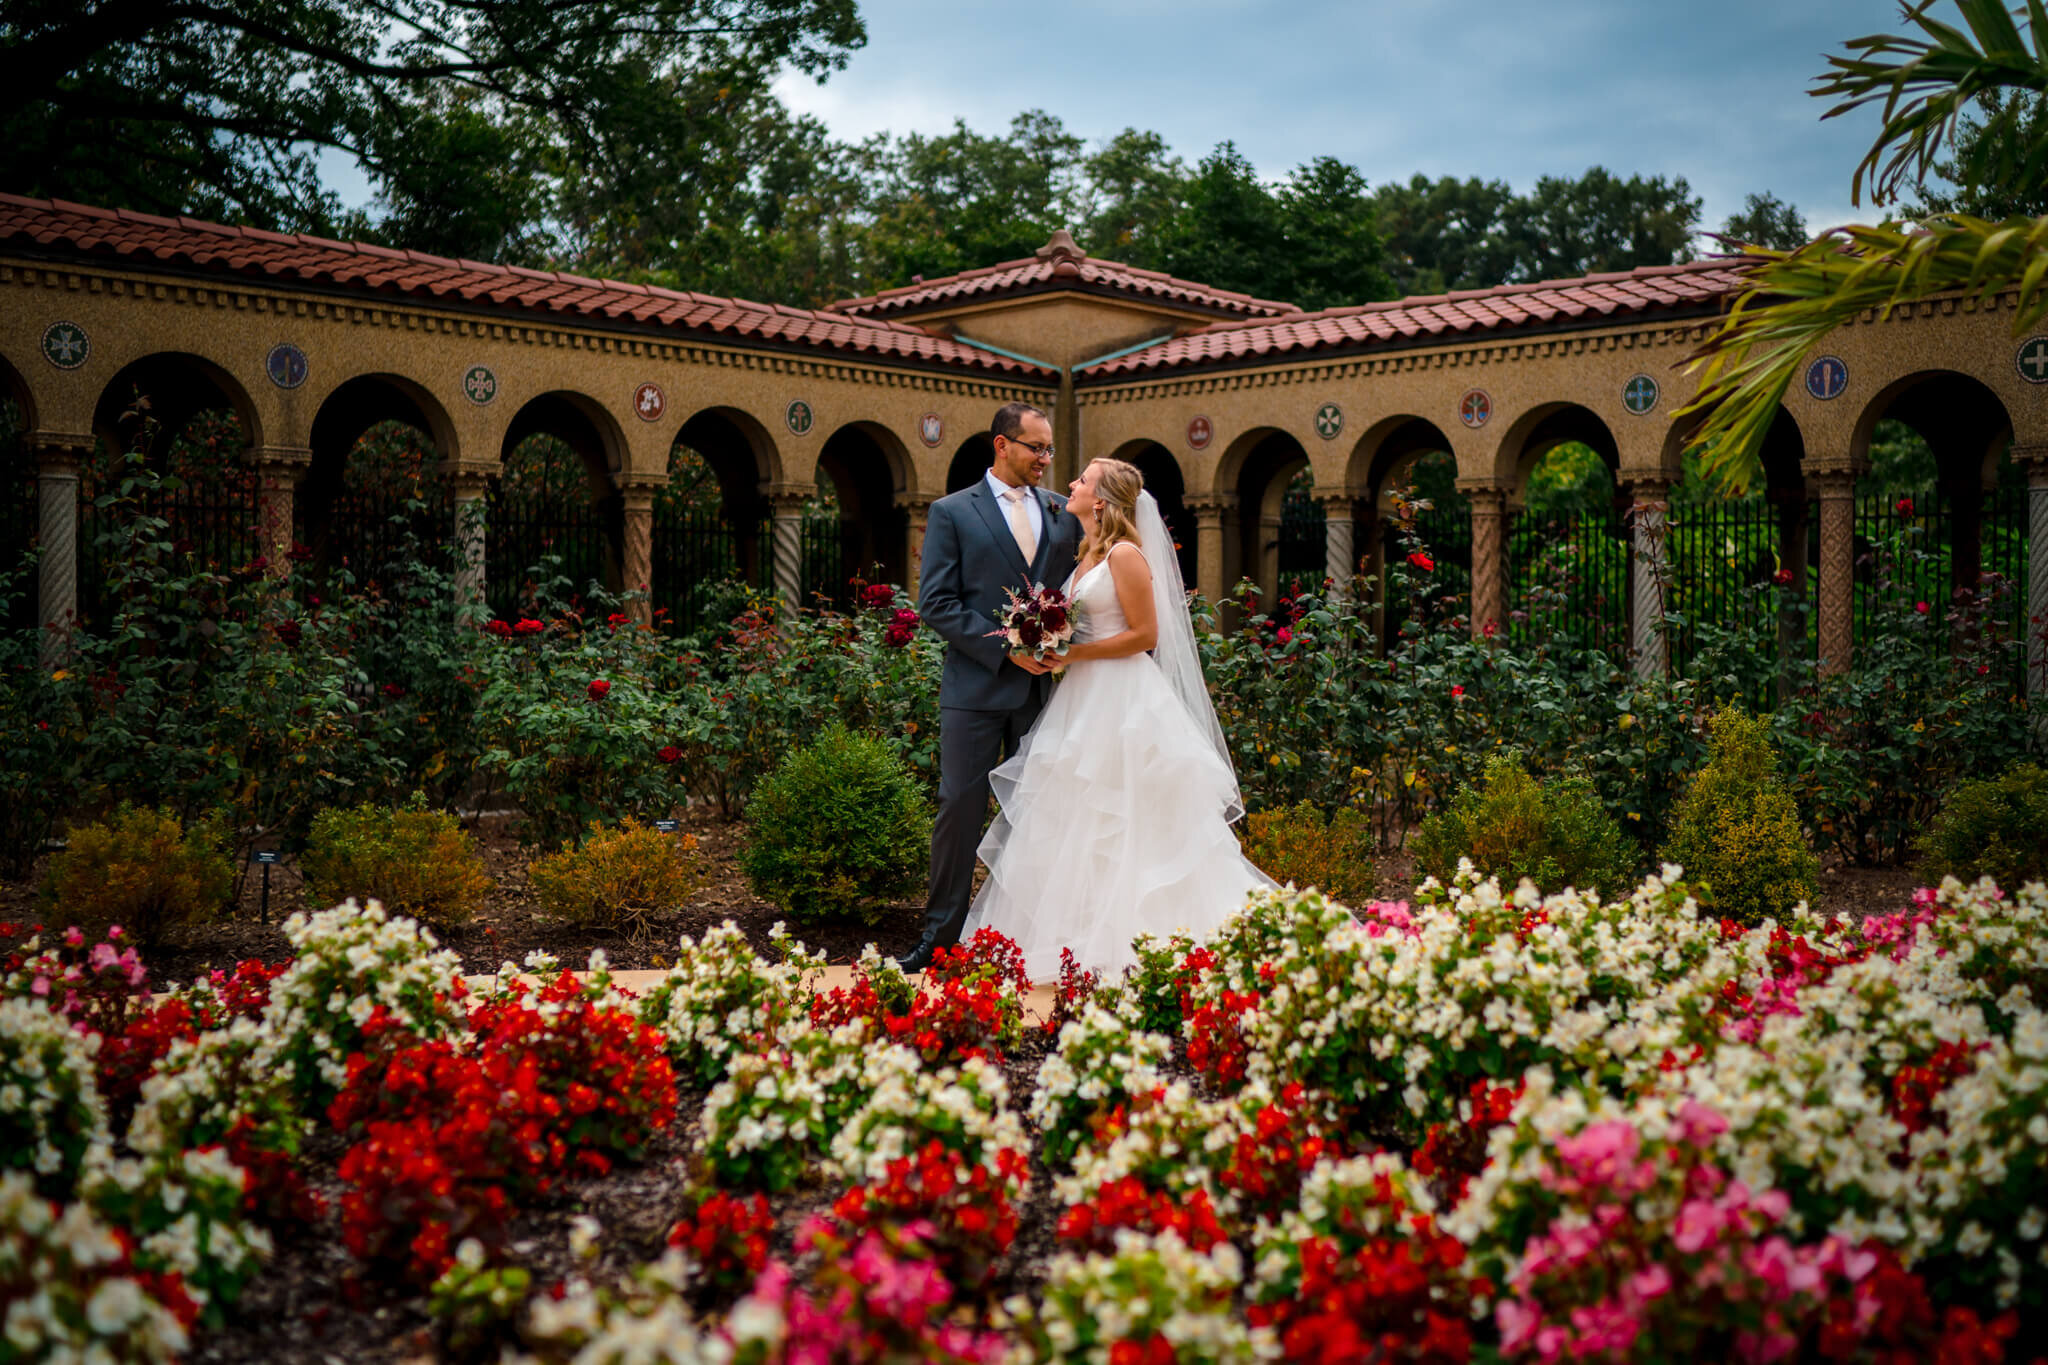 01-Washington-DC-Mini-Wedding-St-Francis-Hall-Franciscan-Monastery-First-Look-Photography-by-Bee-Two-Sweet-51.jpg